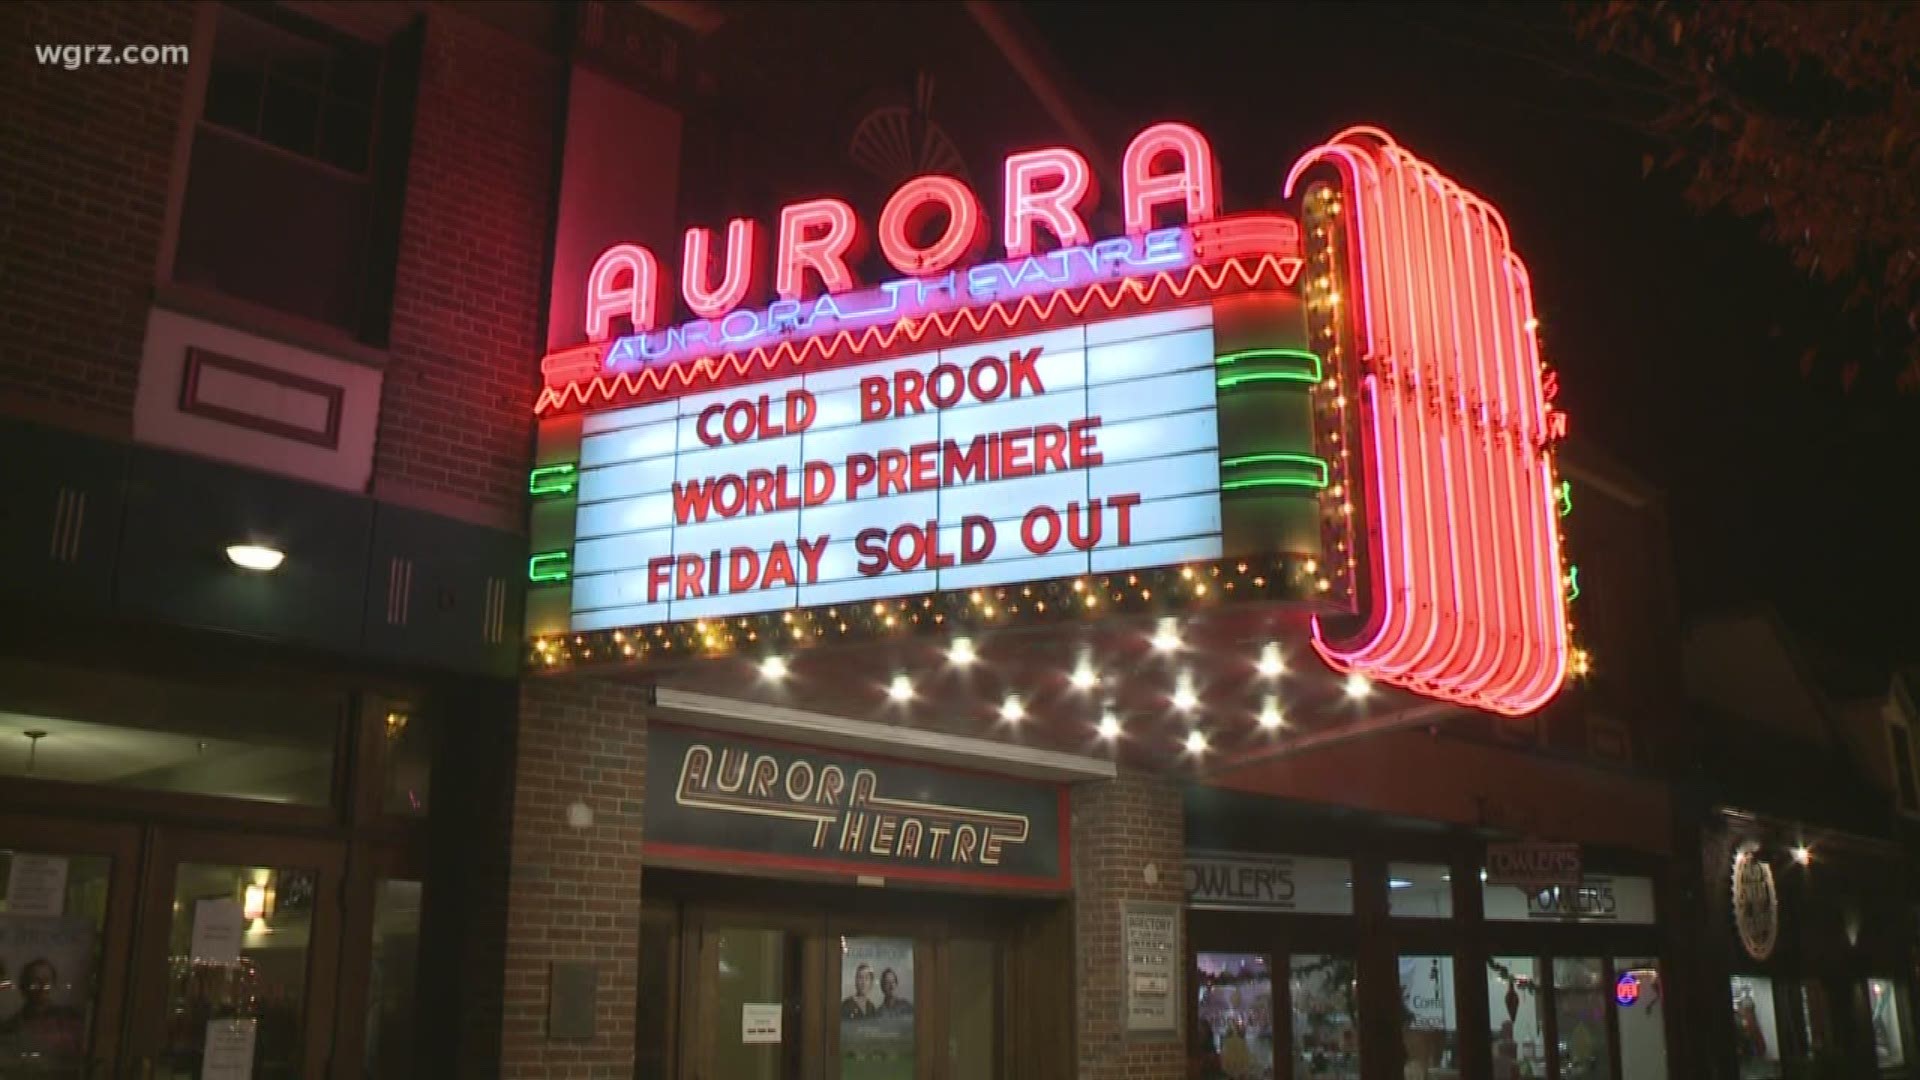 "Cold Brook" star Kim Coates was in East Aurora for the premiere of his new film.